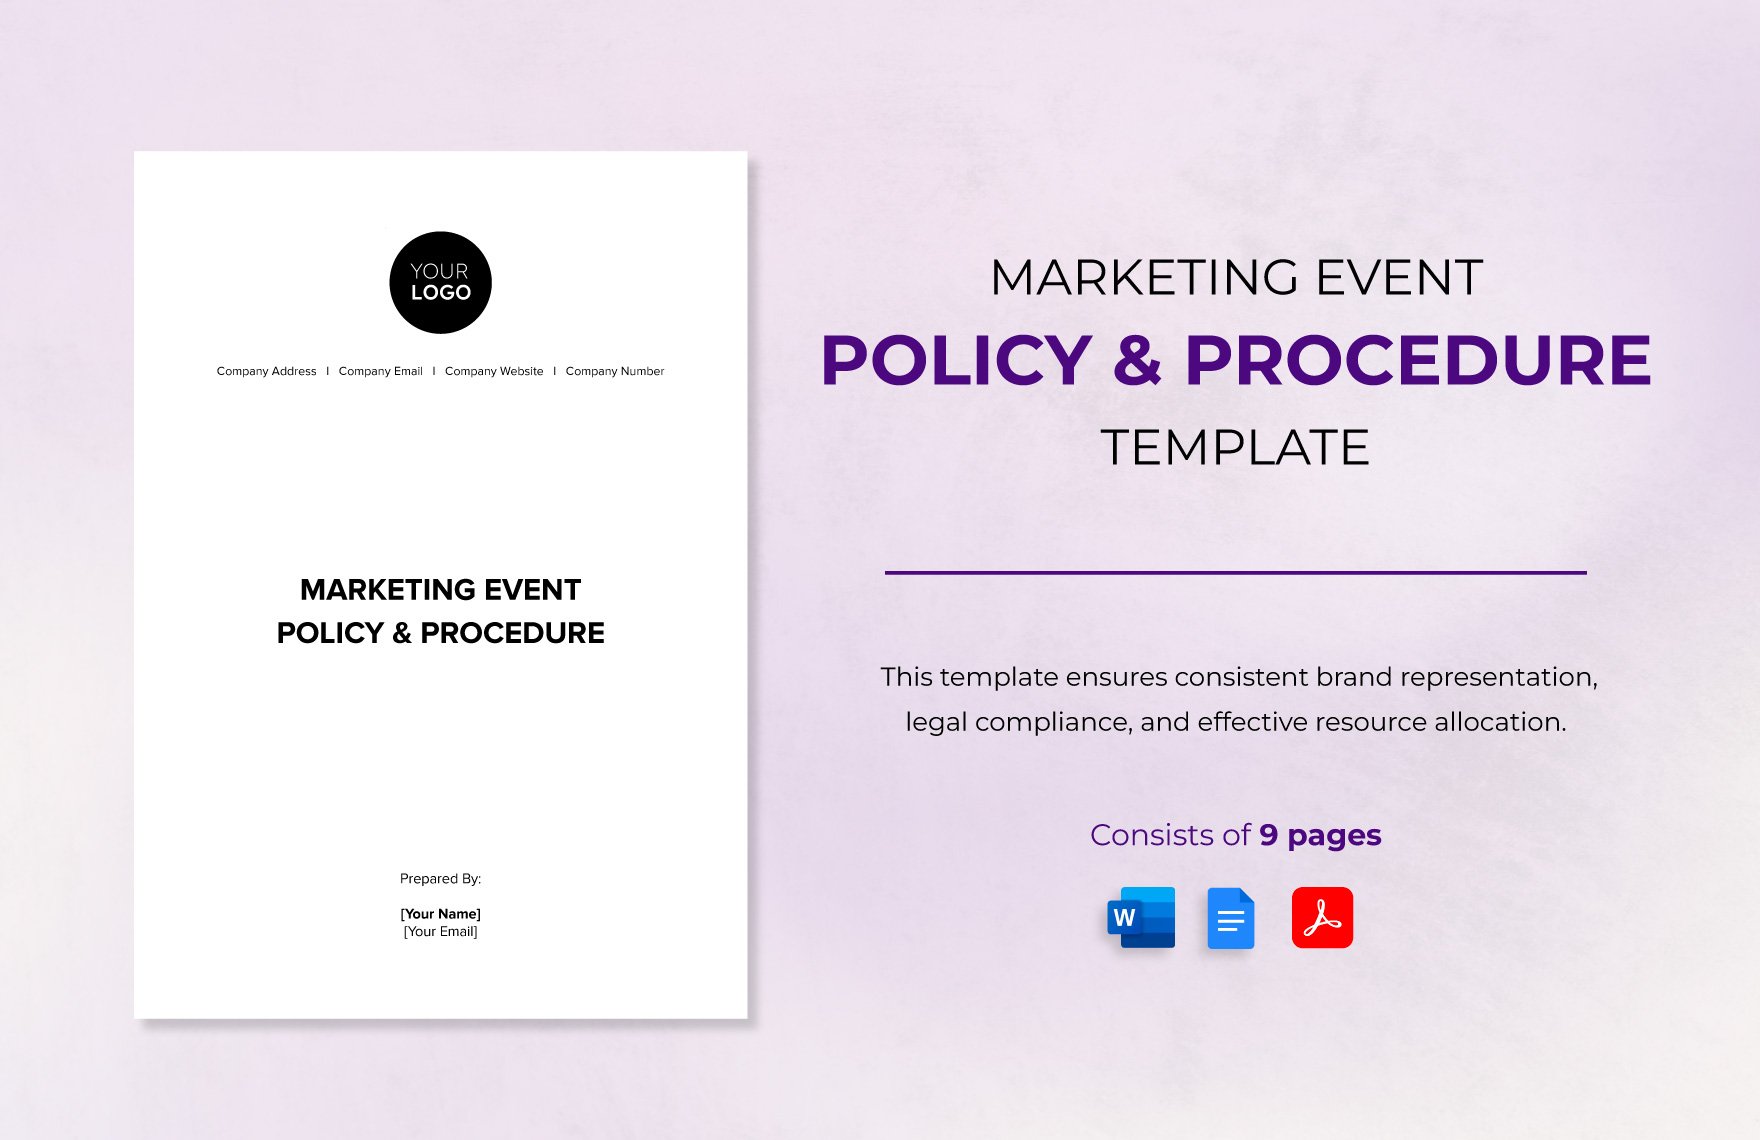 Marketing Event Policy & Procedure Template in Word, Google Docs, PDF